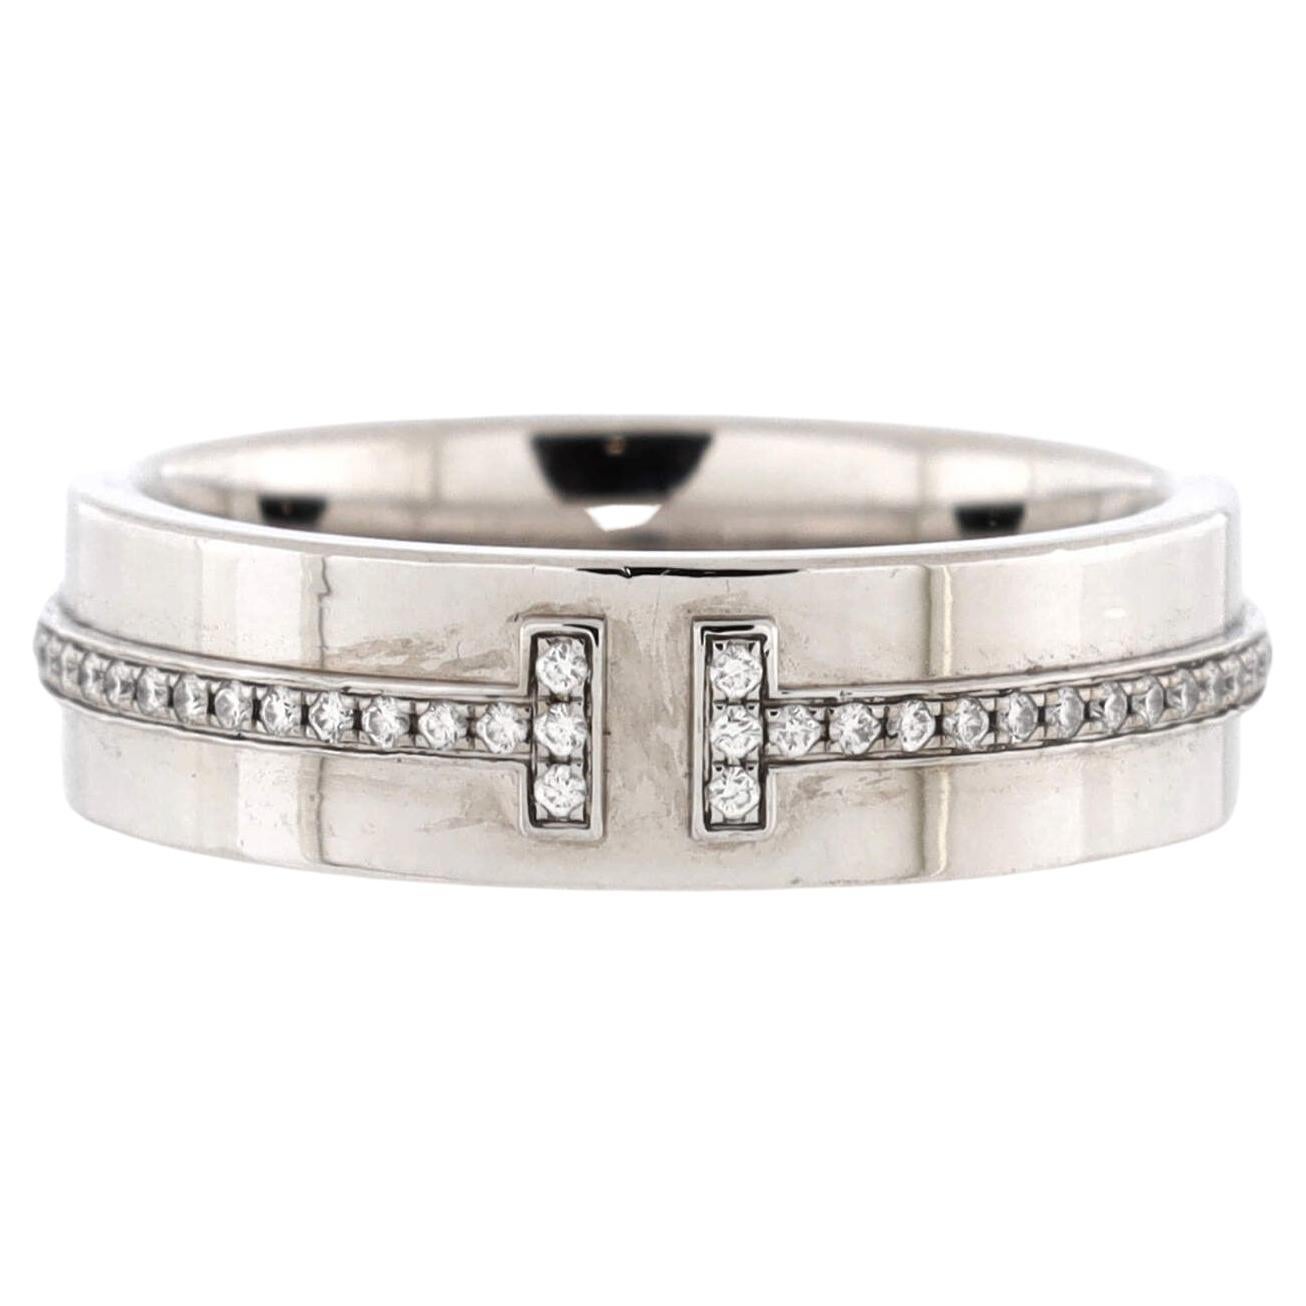 Tiffany & Co. T Two Ring 18k White Gold and Diamonds Wide